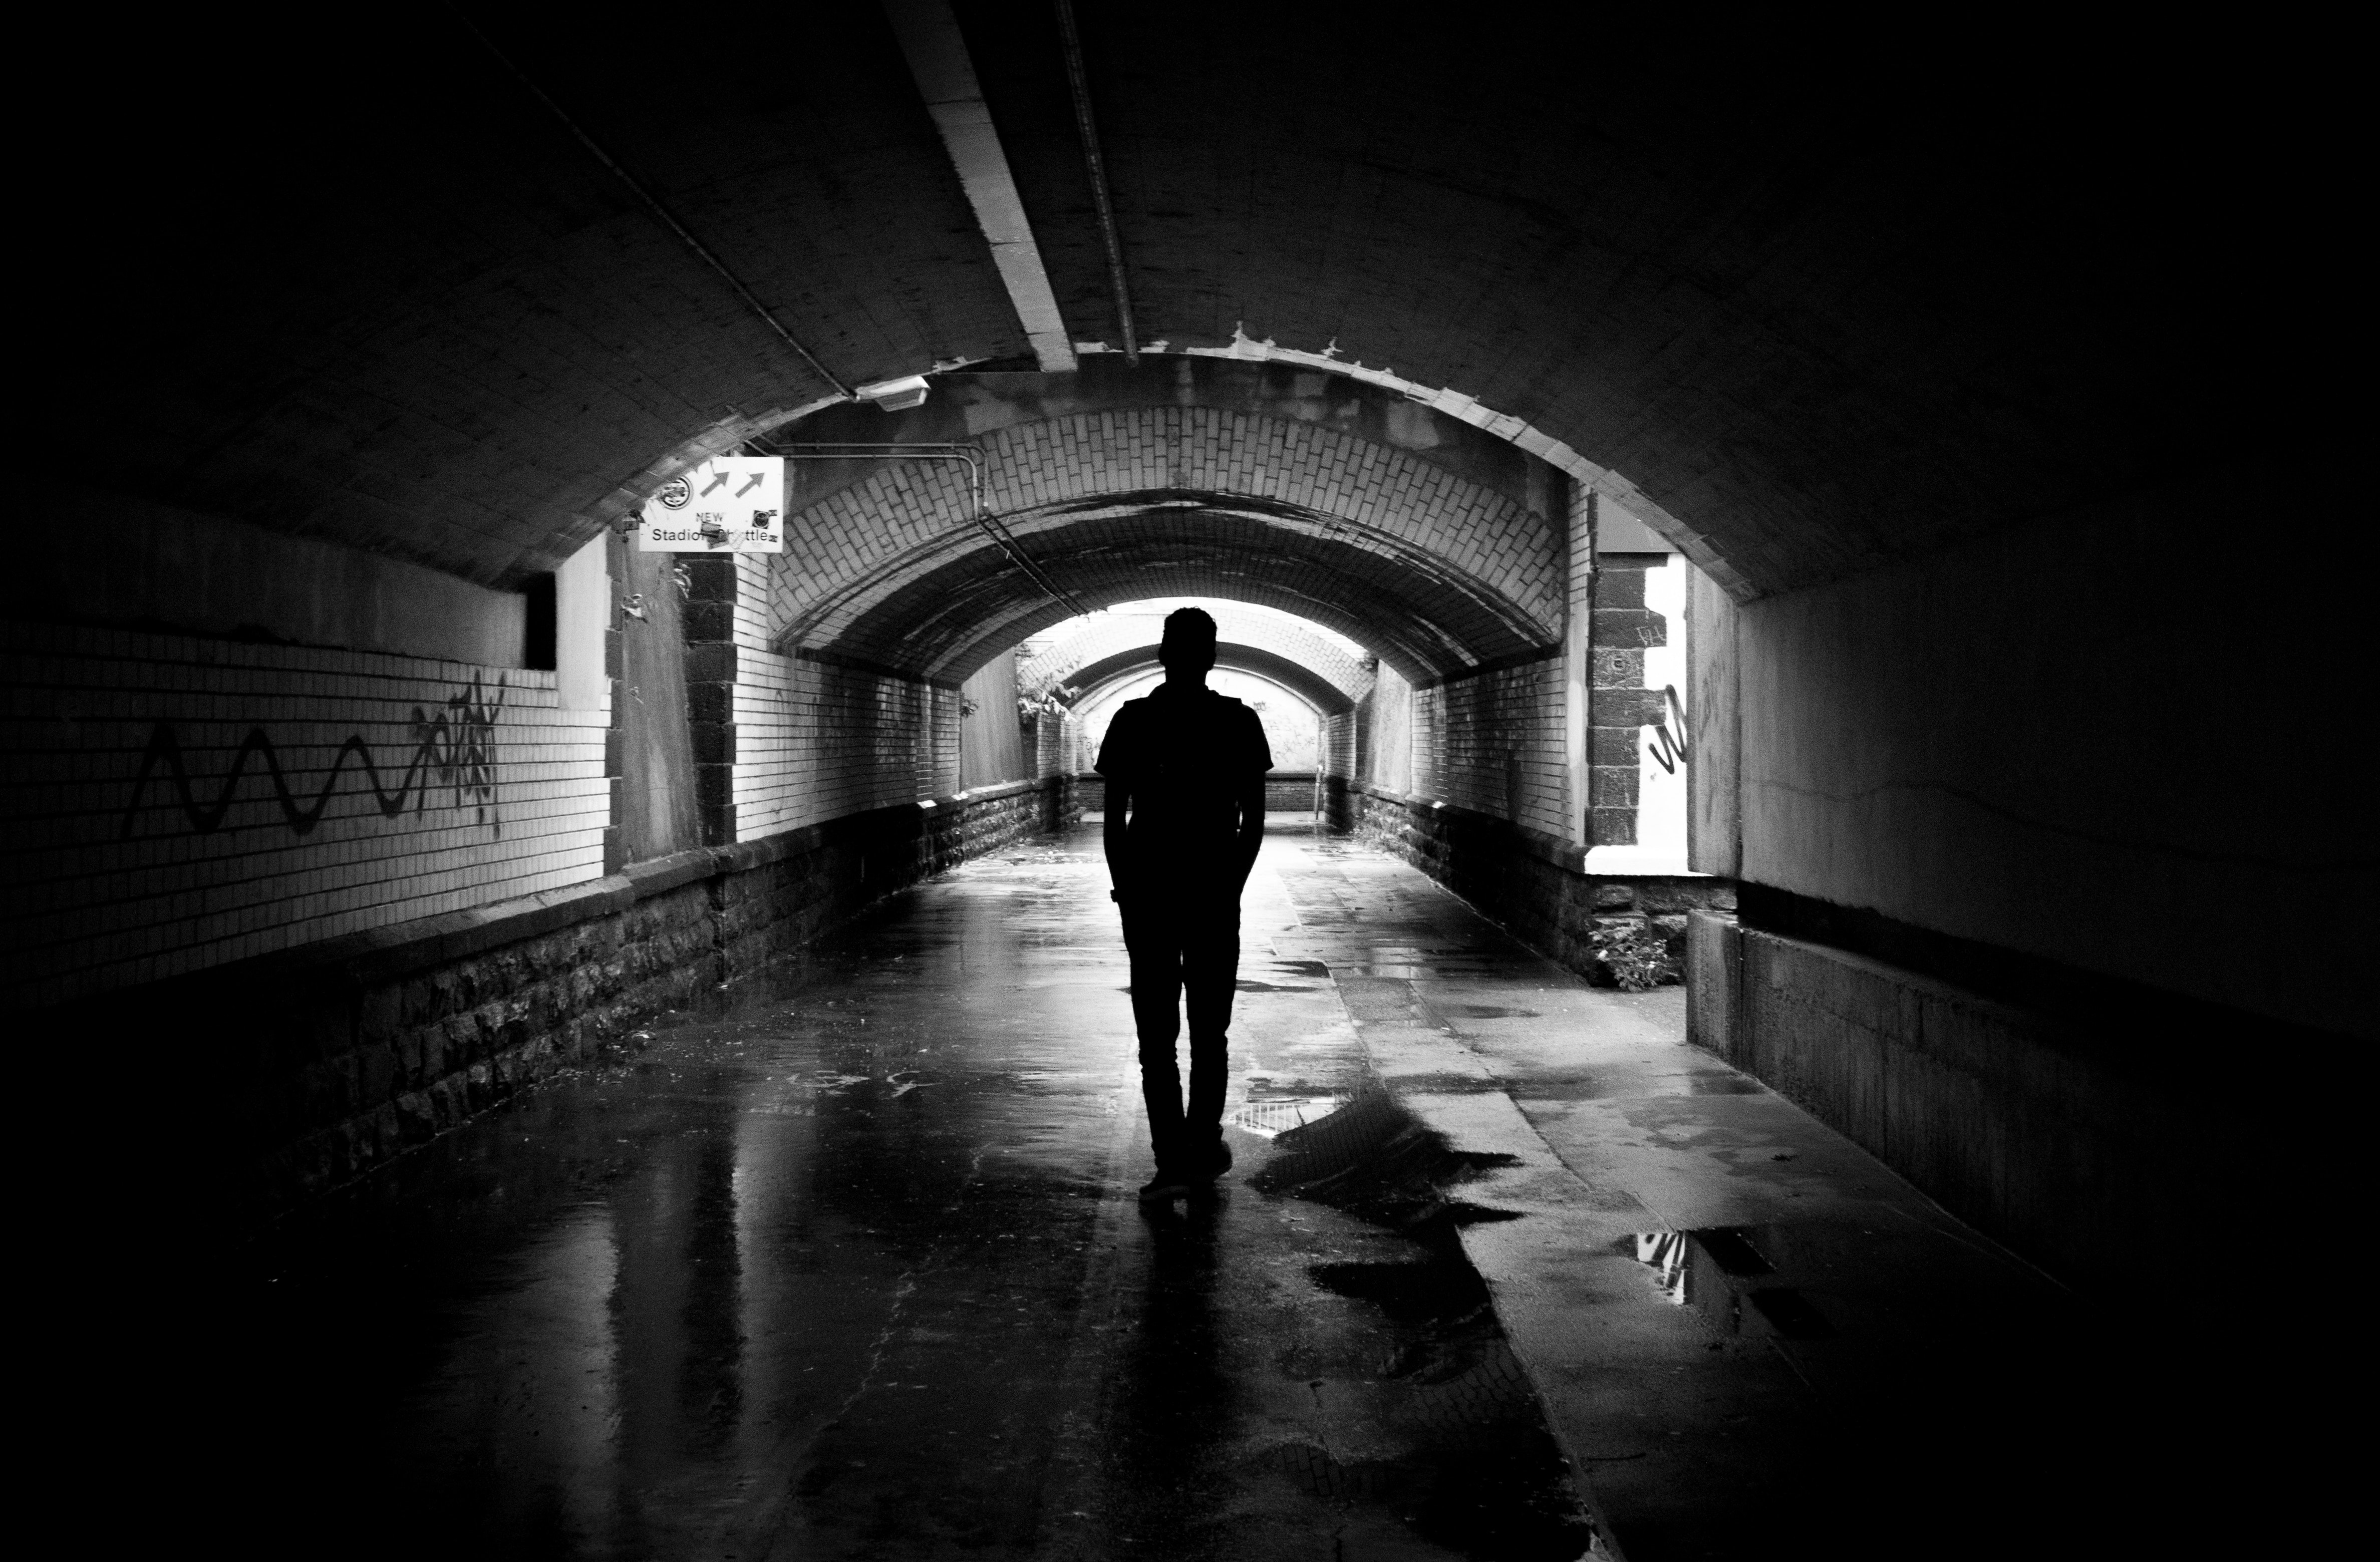 Silhouette Photo of a Man in a Tunnel, Silhouette, Way, Water, Walking, HQ Photo